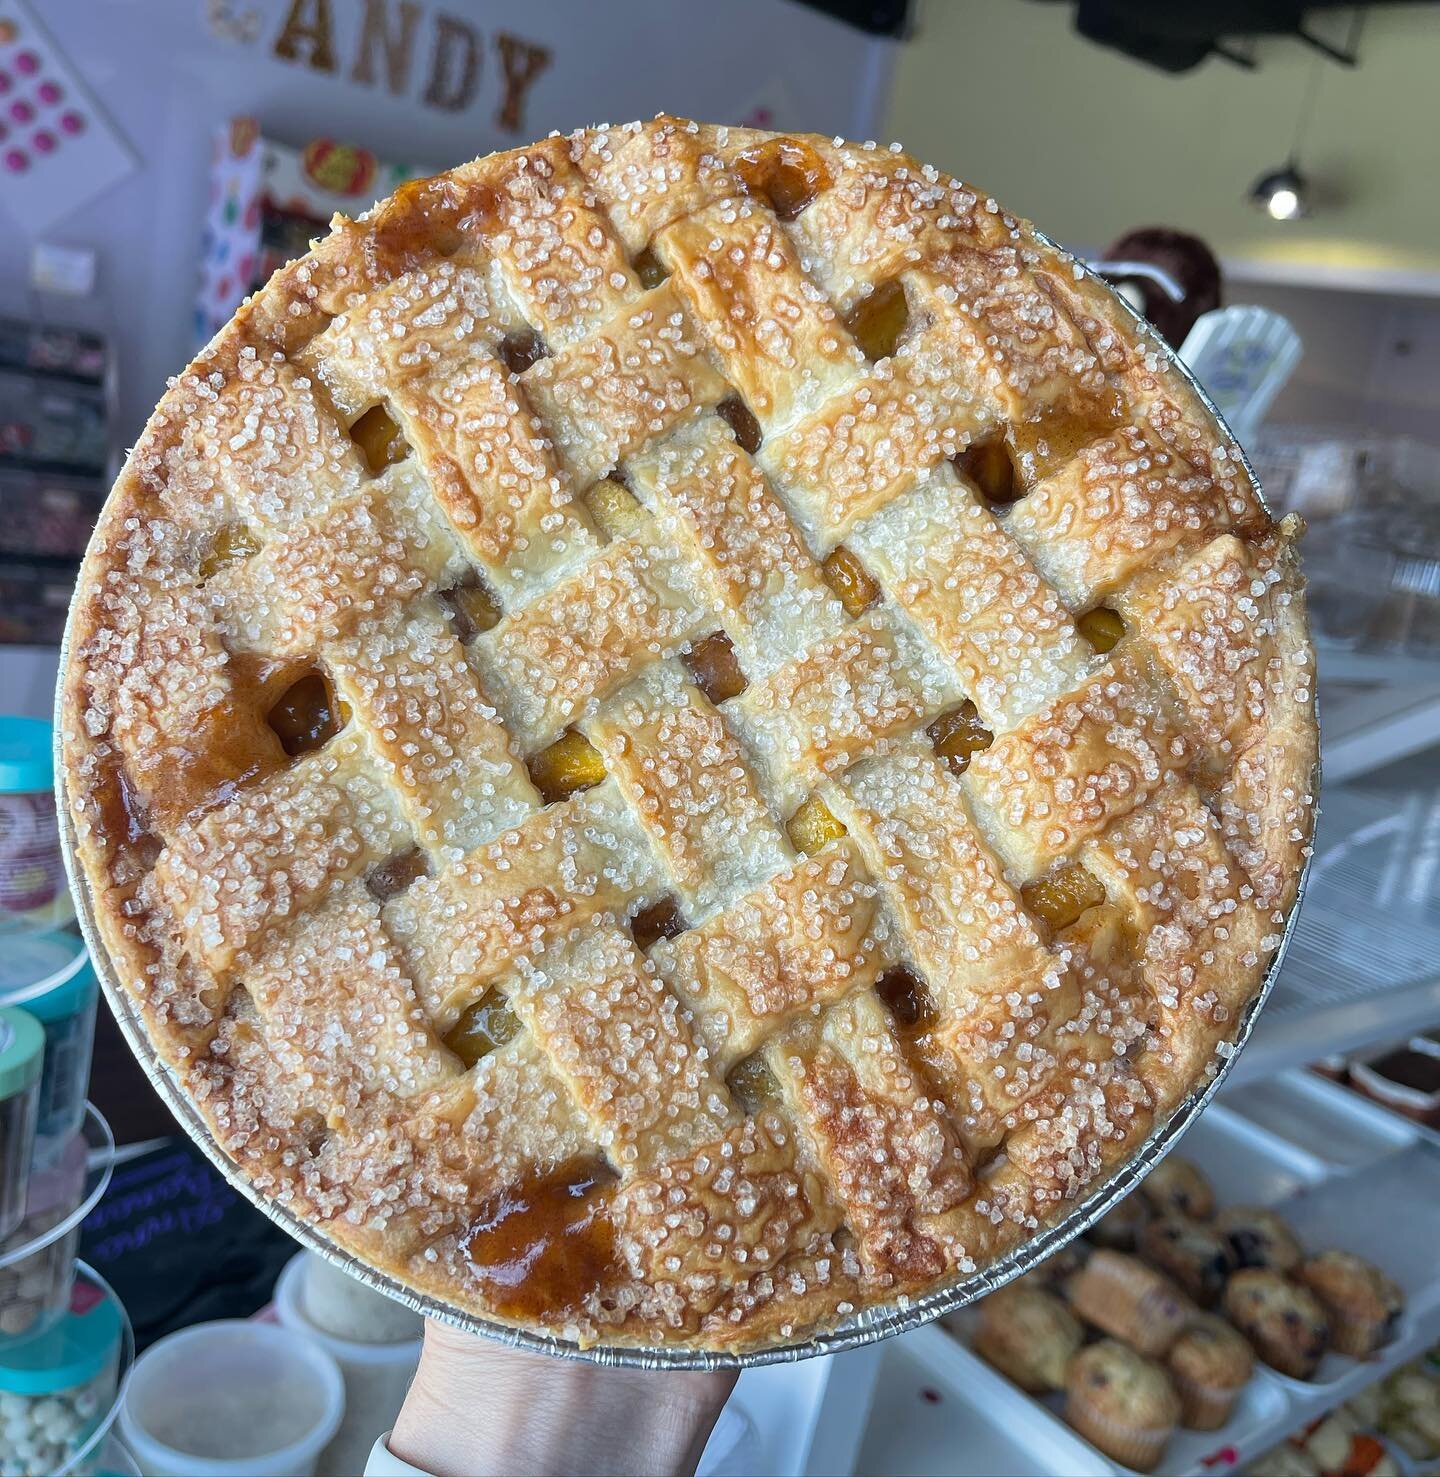 It&rsquo;s officially time 🍑🍑🍑🍑🍑

Our kitchen manager HOPEY has whipped up the first batch of peach pies !!!!

Get them while you can &hellip;. They won&rsquo;t last long 🍑 

9-4:00 (Saturday) plus donuts 🍩 at 9am!